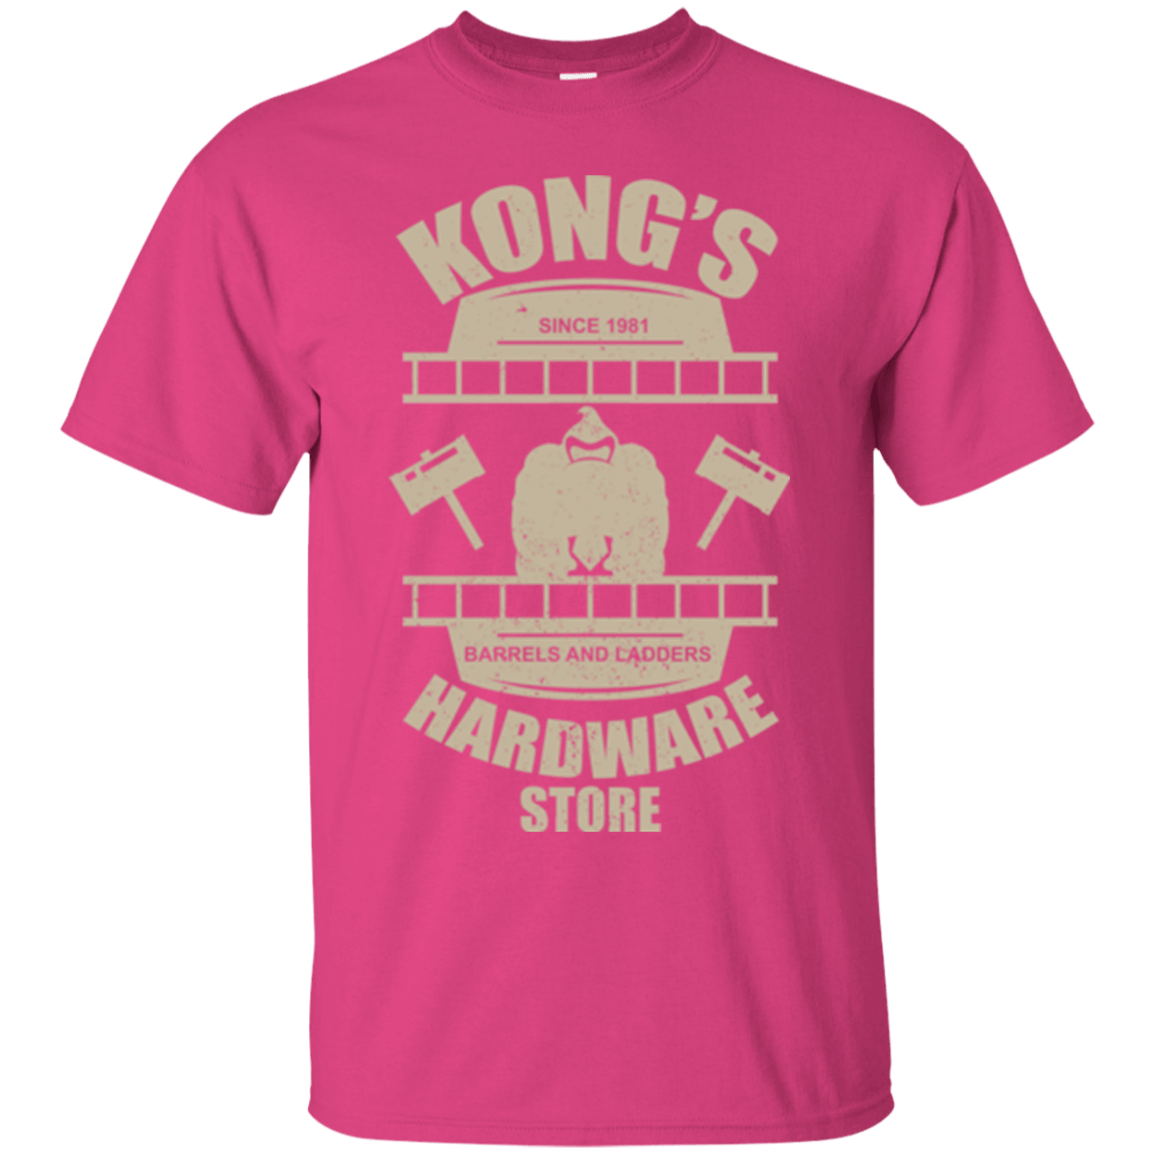 T-Shirts Heliconia / Small Kongs Hardware Store T-Shirt